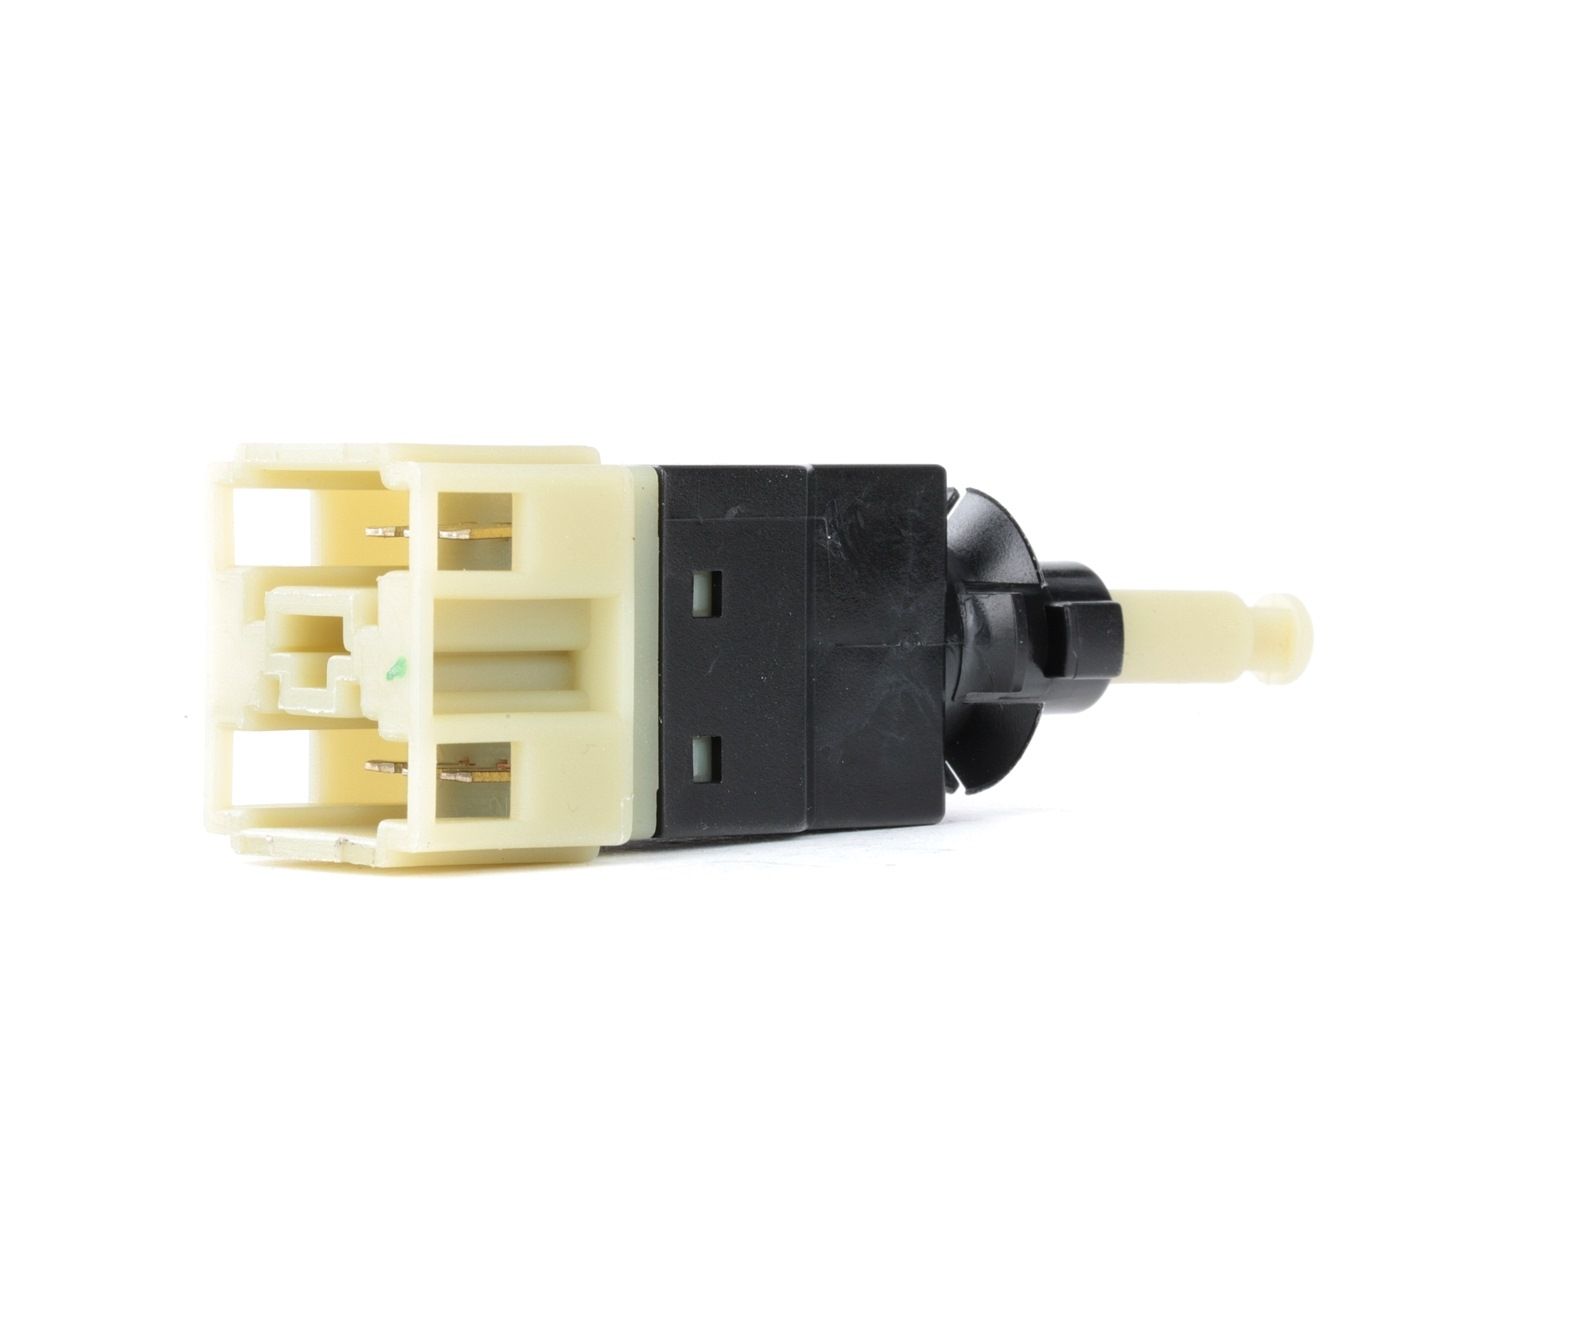 MEYLE 014 899 0024 Brake Light Switch Manual (foot operated), 6-pin connector, ORIGINAL Quality